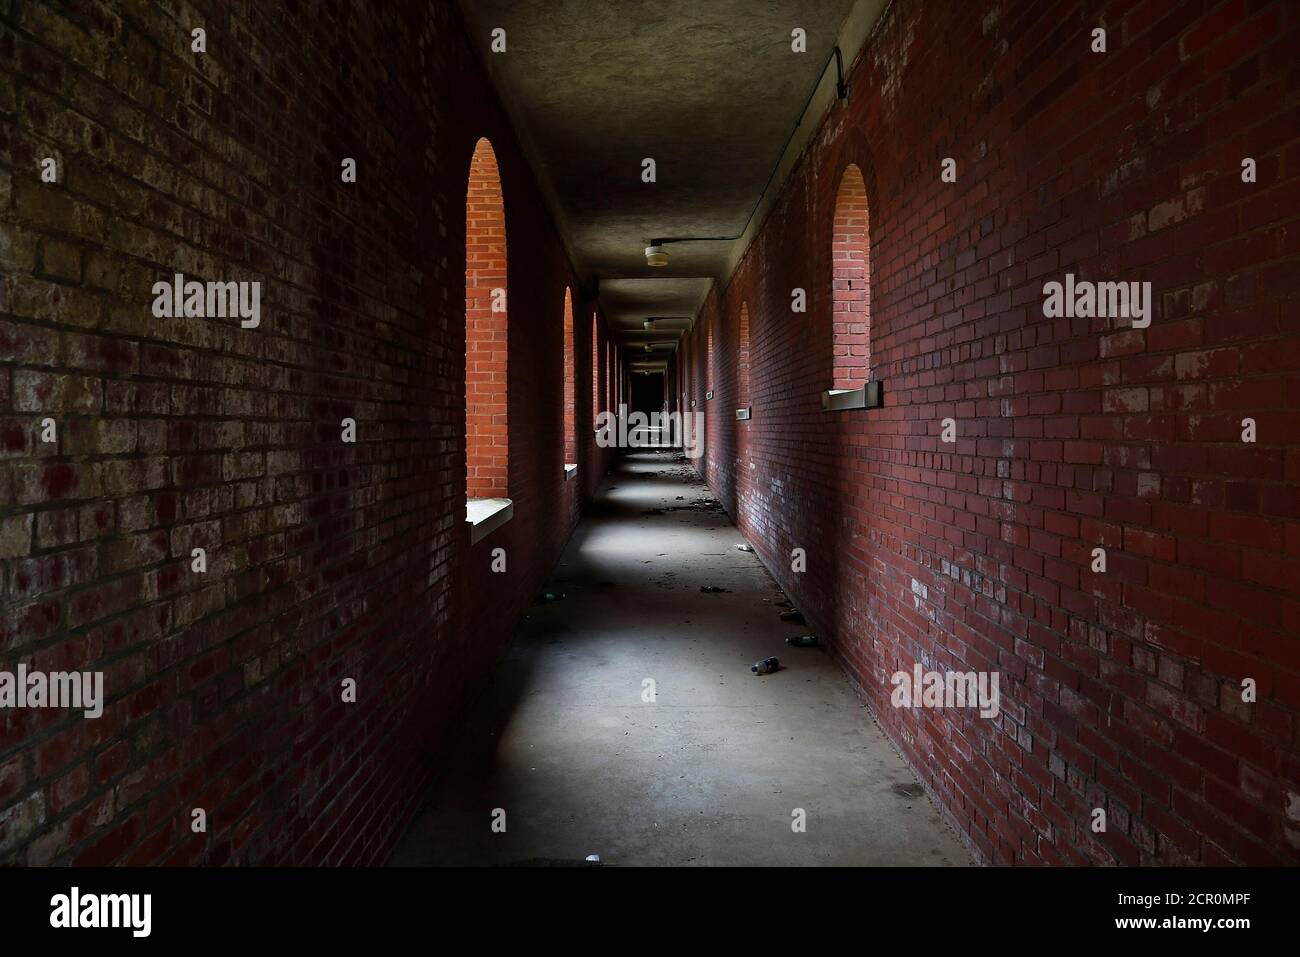 A brick corridor connects abandoned buildings on the grounds of the east campus of the historic St. Elizabeth's Hospital in Washington, July 28, 2012. The hospital complex - opened in the 19th century and once home to thousands of criminally and civilly committed mental health patients - is now divided into a federal parcel that is home to a modern mental health facility and Department of Homeland Security offices, and this parcel which the District of Columbia city government plans to redevelop. REUTERS/Jonathan Ernst    (UNITED STATES - Tags: POLITICS) Banque D'Images